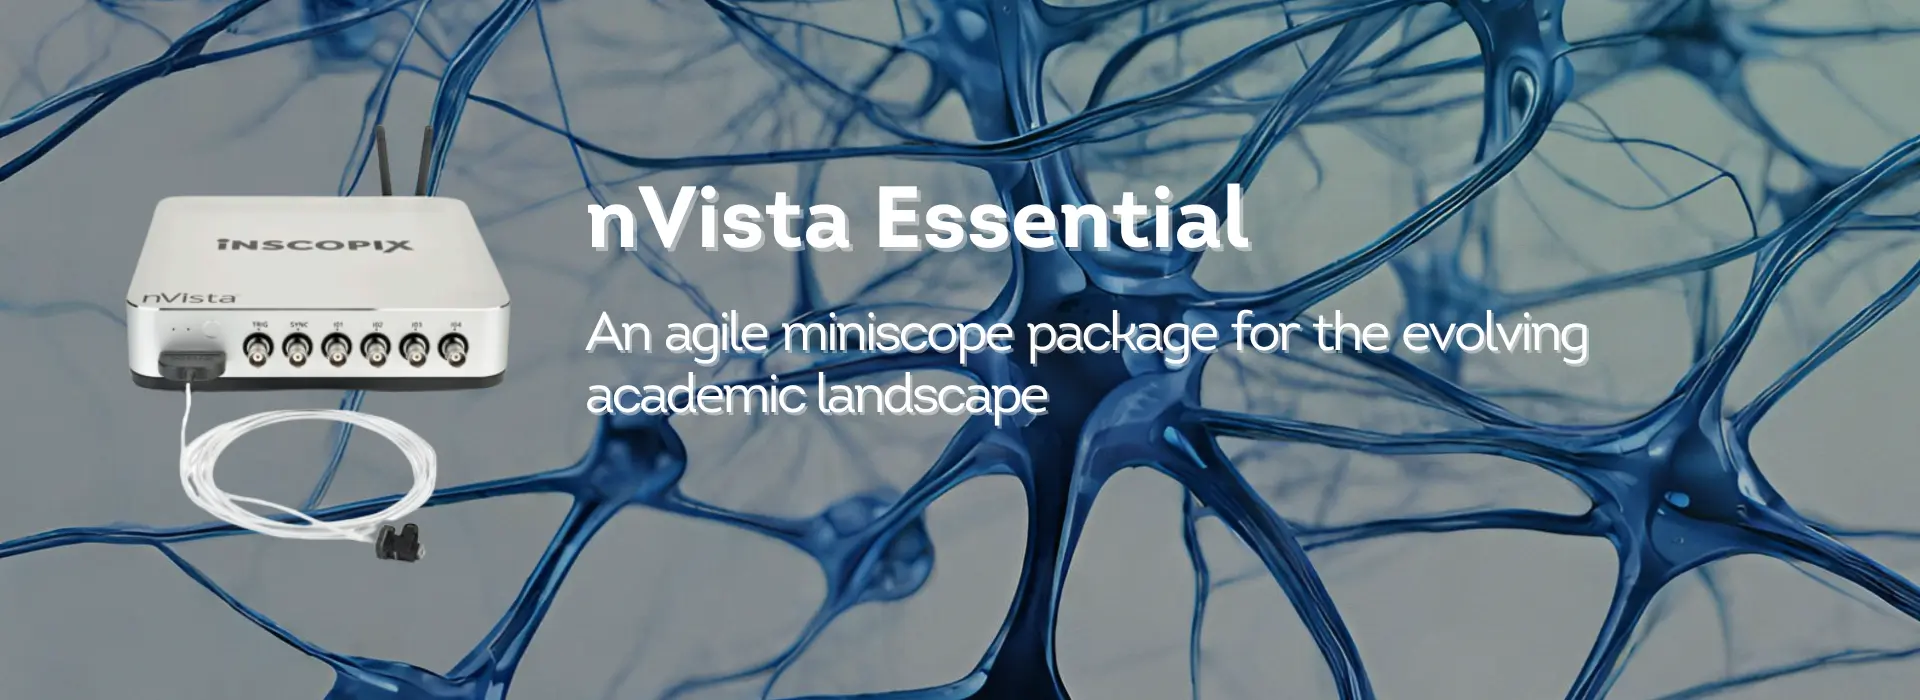 nVista Essential - An agile miniscope package for the evolving academic landscape